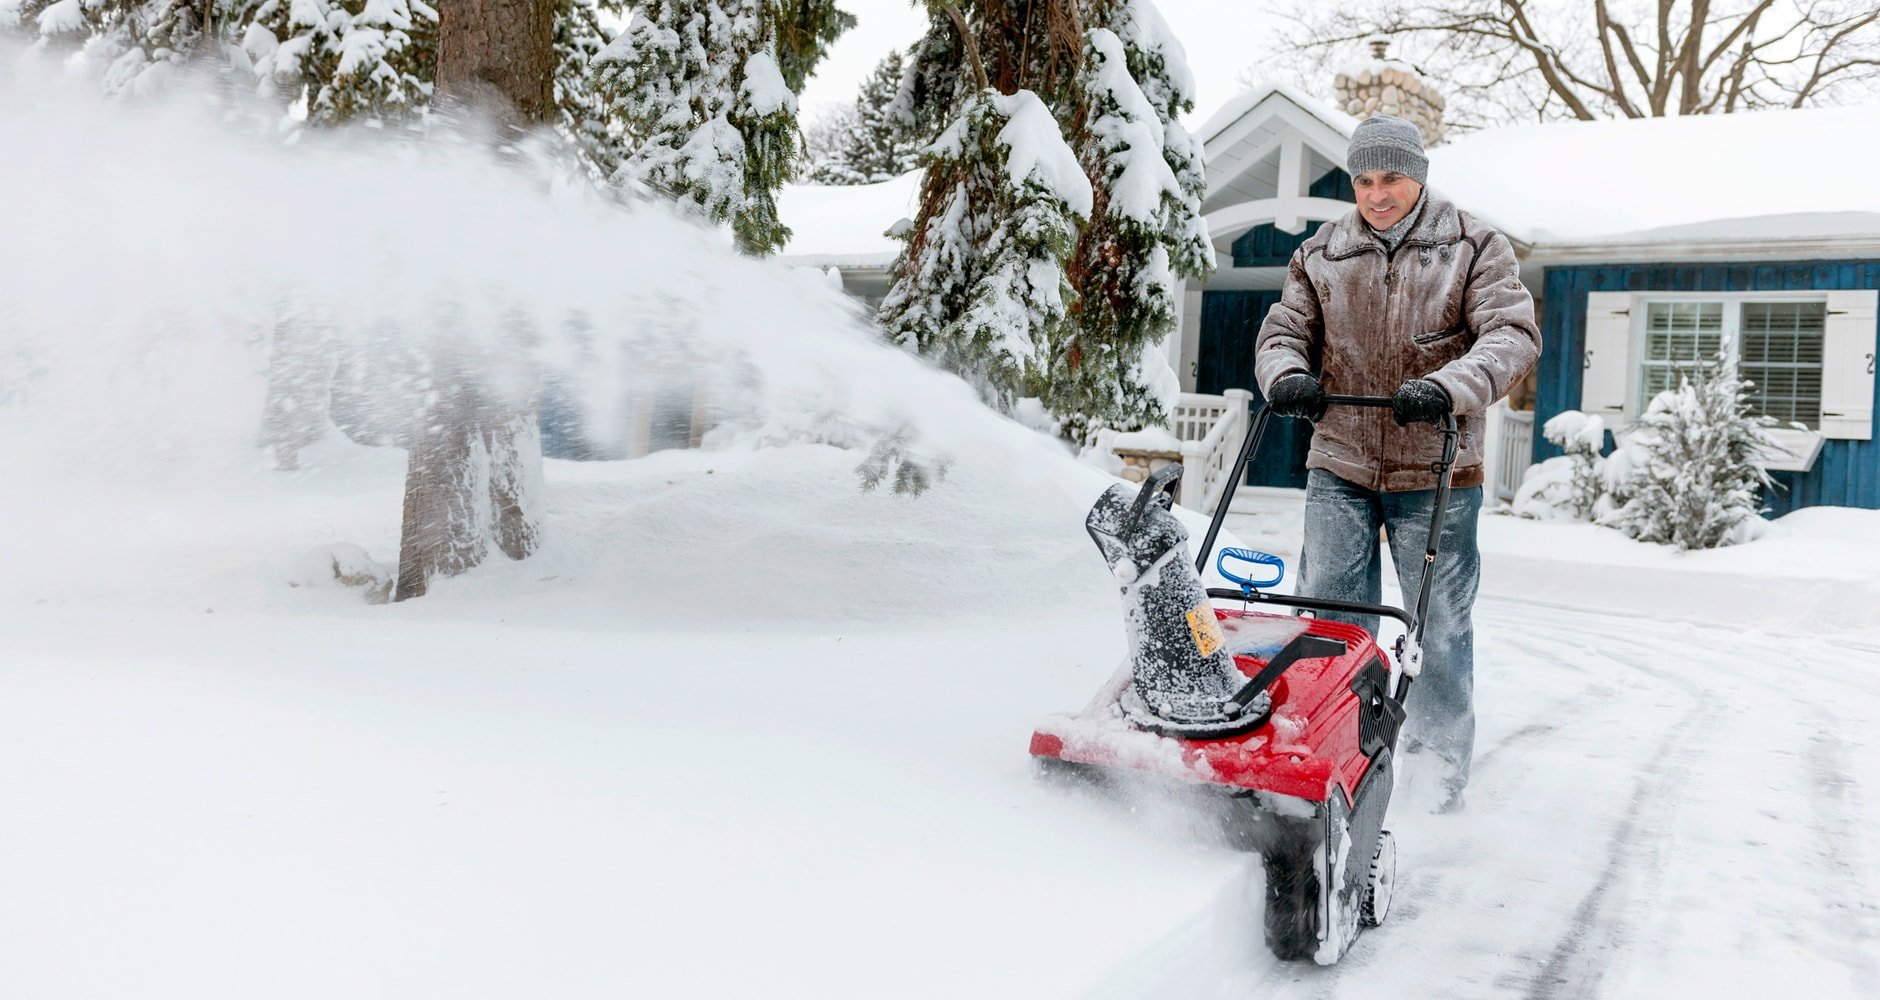 Why A Ceramic Coated Snow Blower is the Ultimate Winter Hack